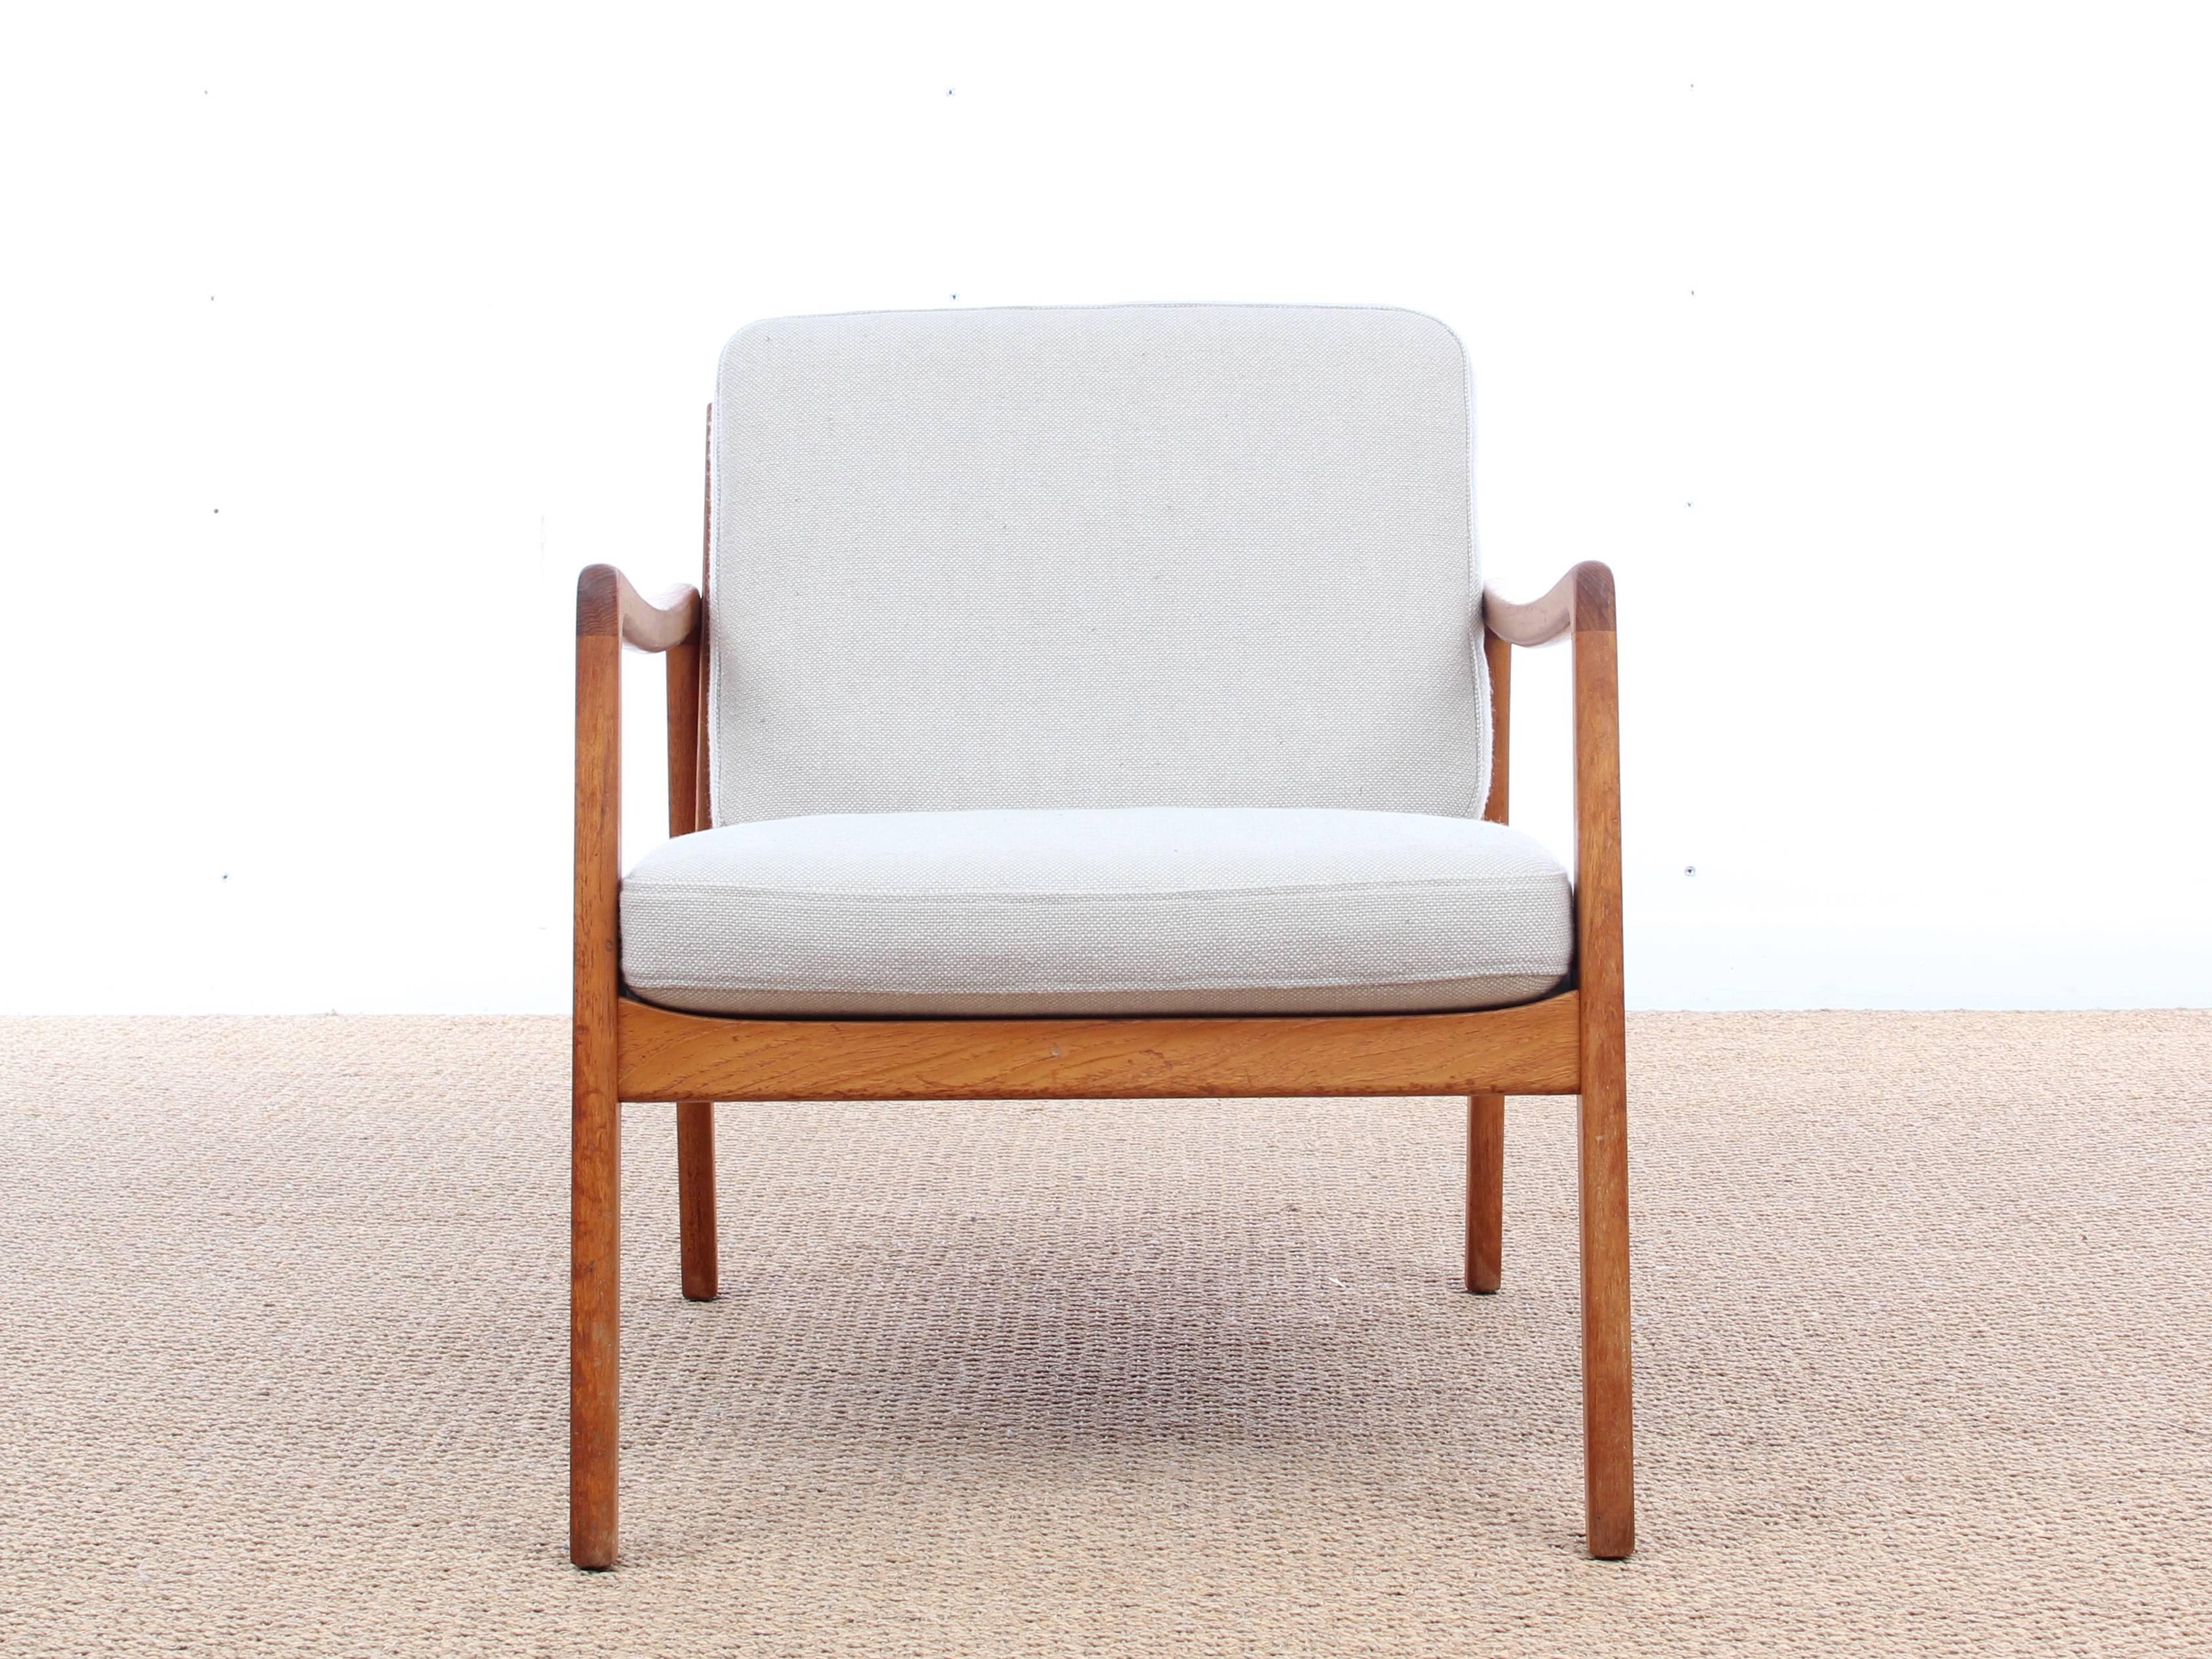 Mid-Century Modern, Danish pair of lounge chairs in teak model 110 by Ole Wanscher. Seats will be reupholstered with fabric of your choice between step Melange fabric from Gabriel. Other references with supplement. The price includes the renovation.